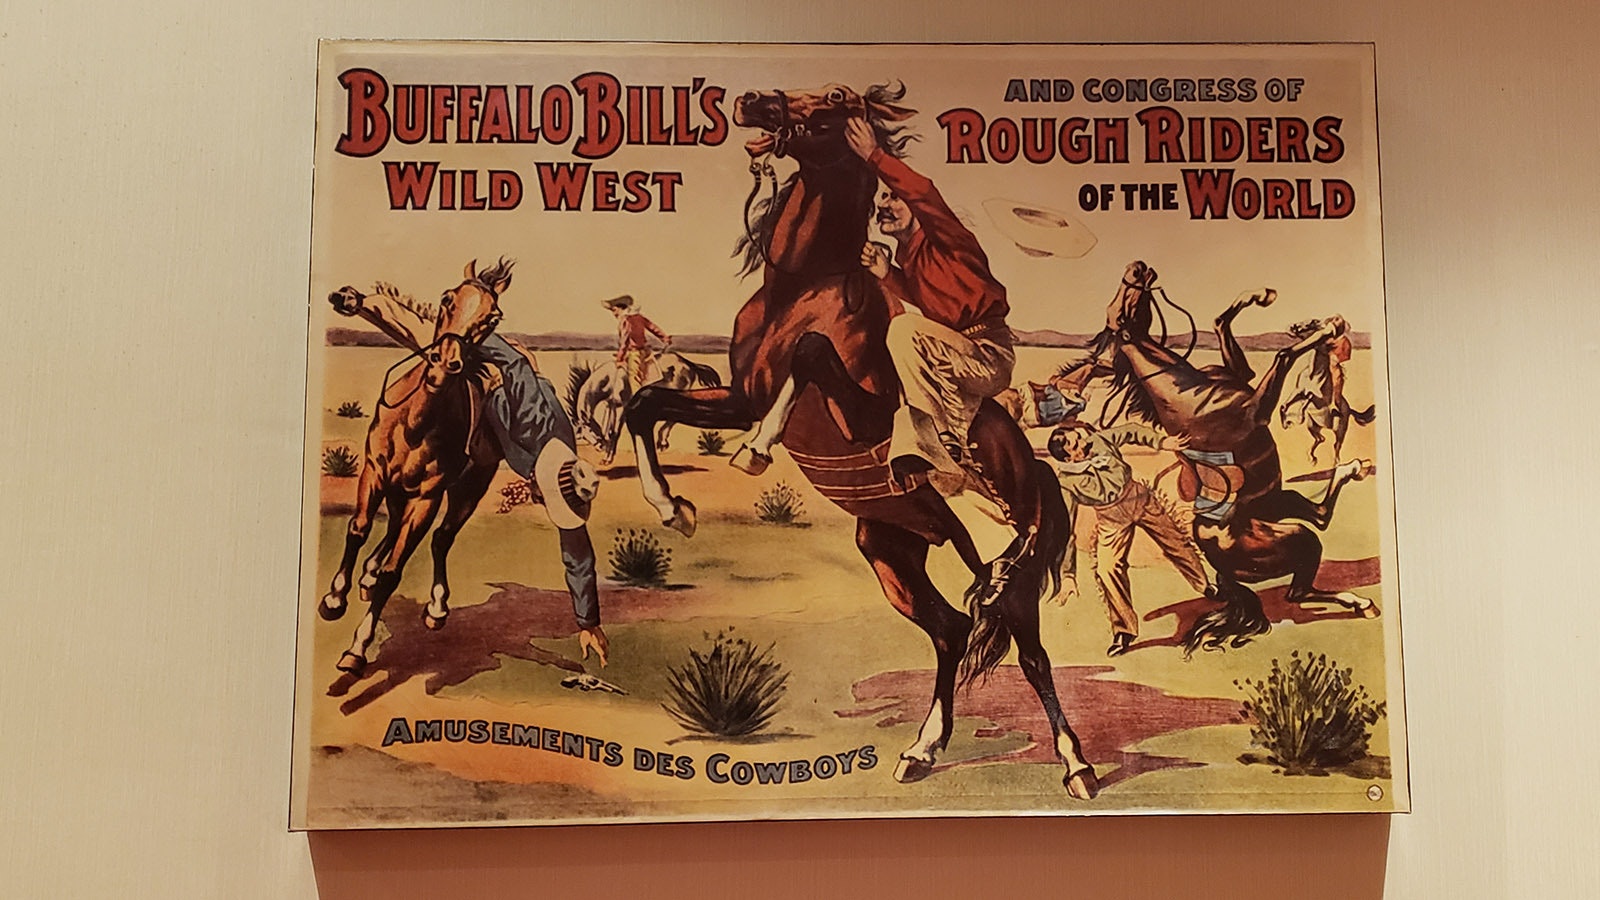 No one is sure where the billboards on the wall came from, but they advertise iconic Western scenes, most of them related to Wyoming.